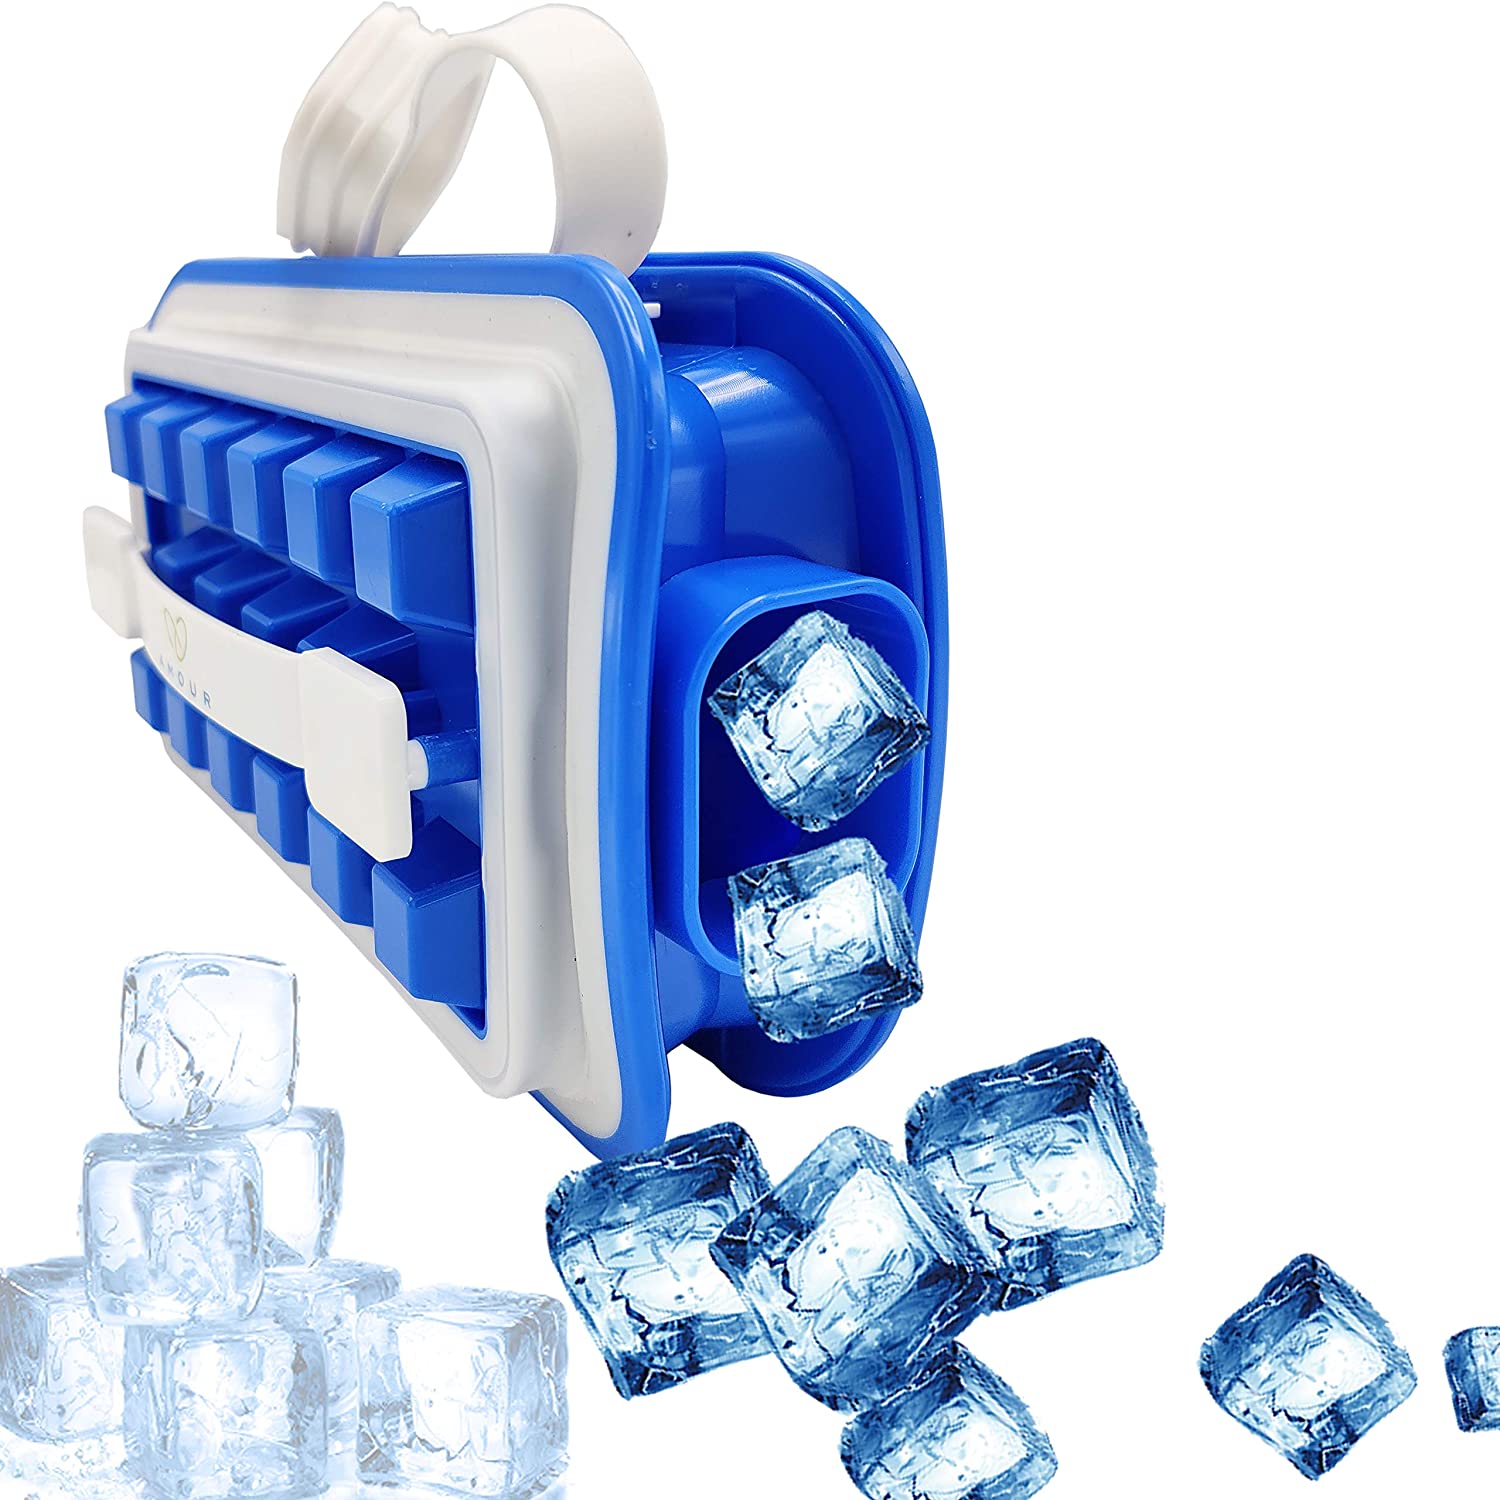 Amour POP Ice Maker - Innovative Cube Tray Mold - Ice Maker, Storage Container, Dispenser - Ultra-Portable, Insulated to Limit Melting, Non-BPA - Makes 18 Large Frozen Cubes - Sapphire Blue Color